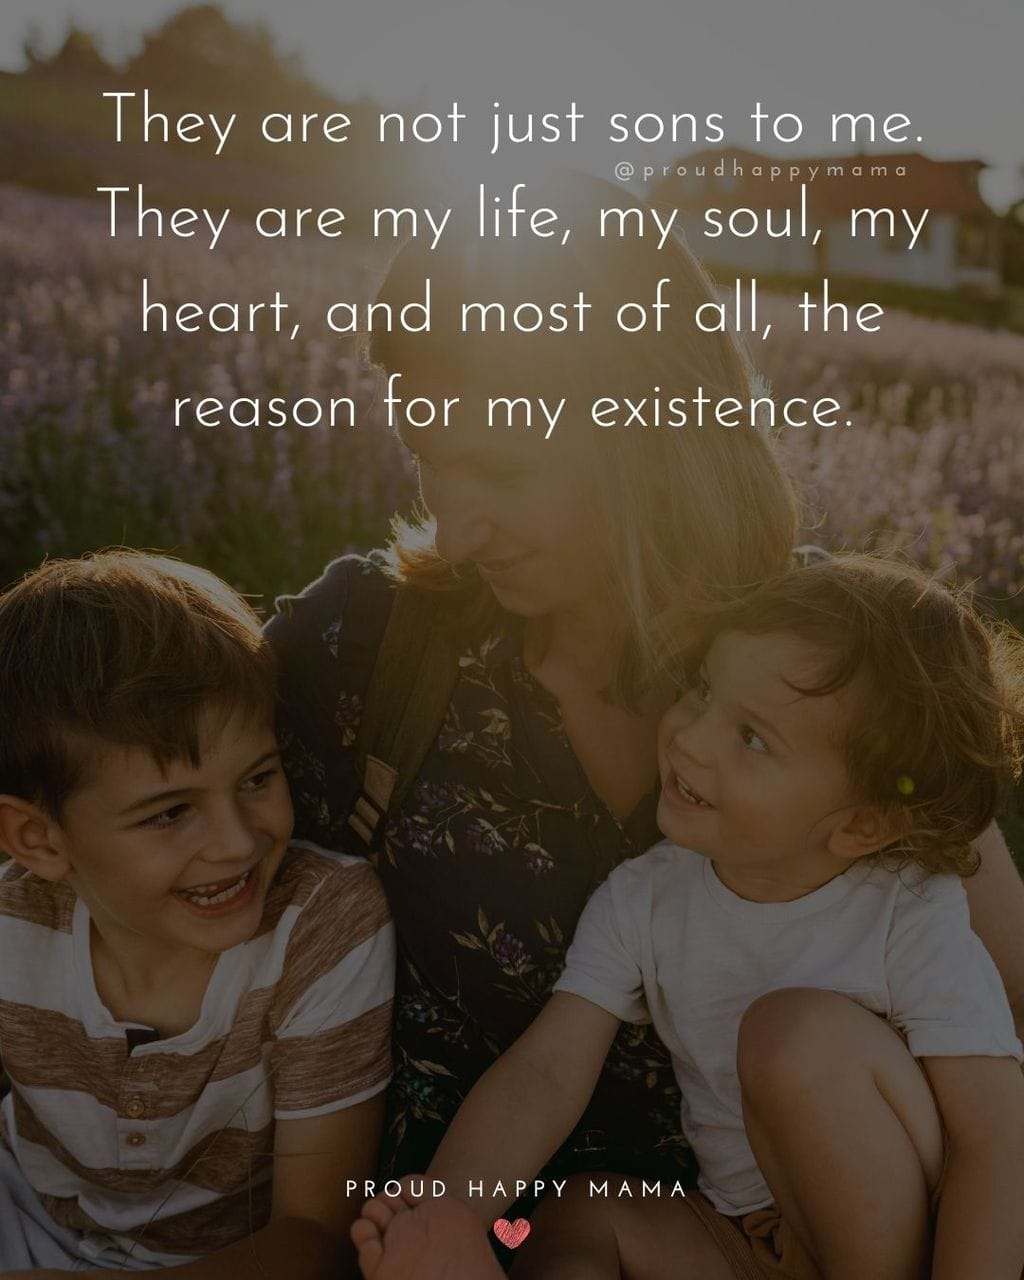 Boy Mom Quotes - They are not just sons to me. They are my life, my soul, my heart, and most of all, the reason for my existence.